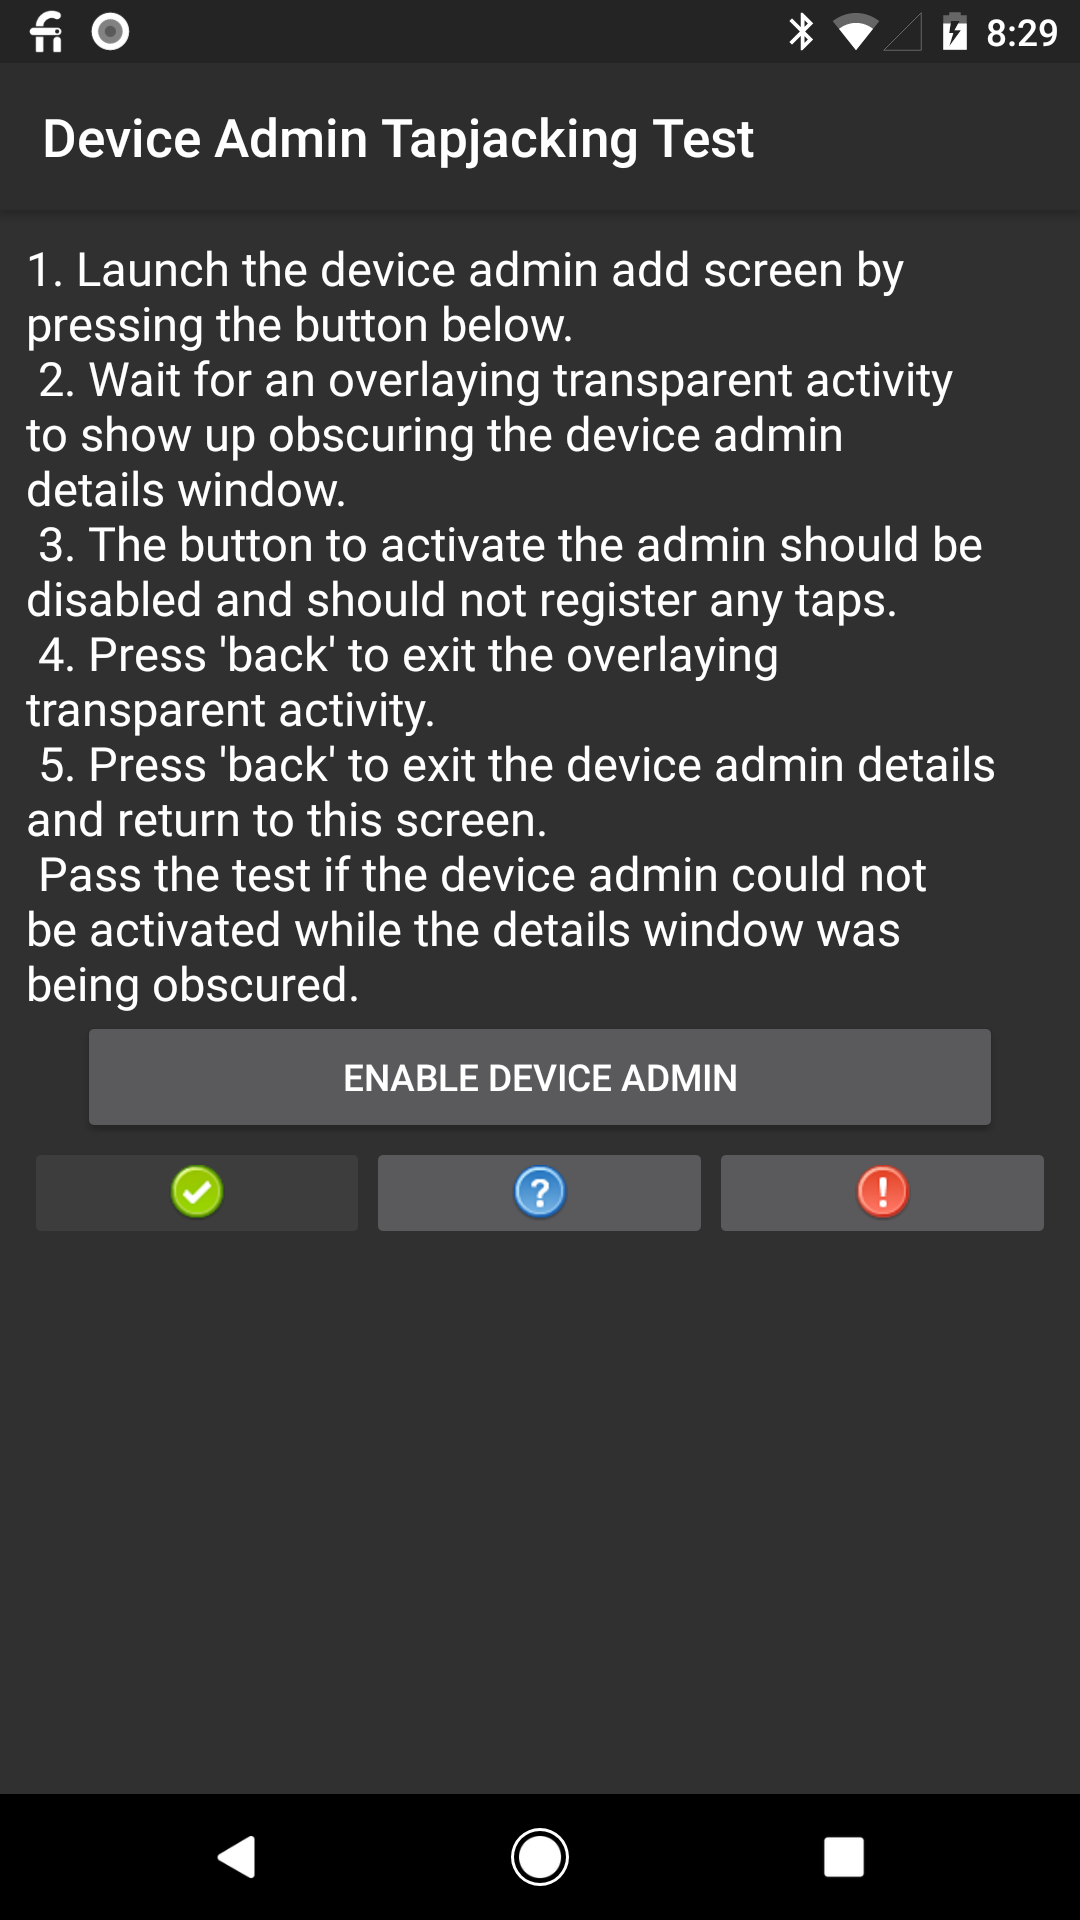 Enable device admin